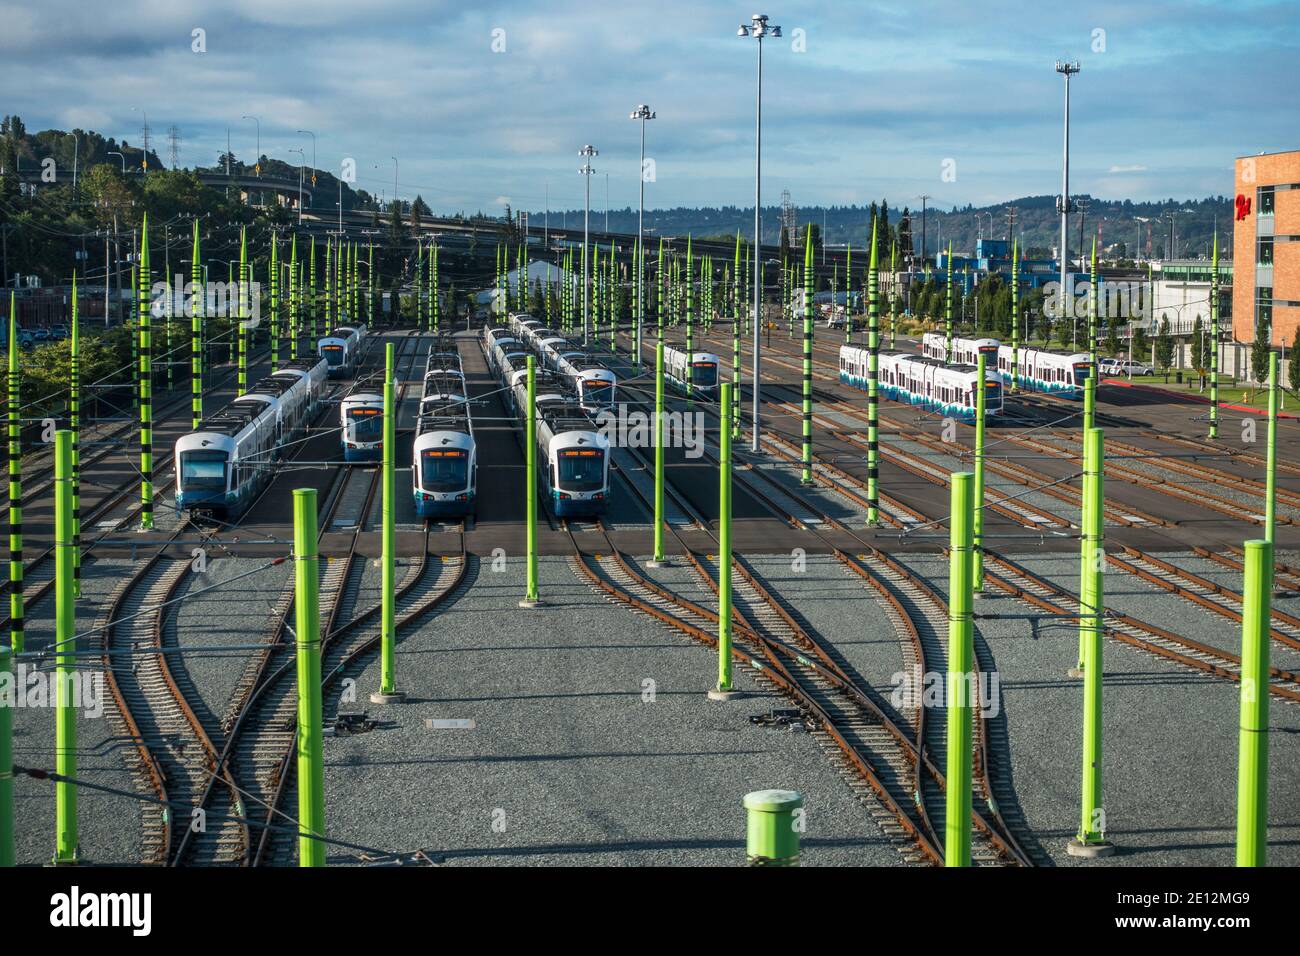 Seattle 's Sound Transit Central Light Rail Operations and Management Facility is located in the SODO district near the Old Rainer Brewery, on the wes Stock Photo